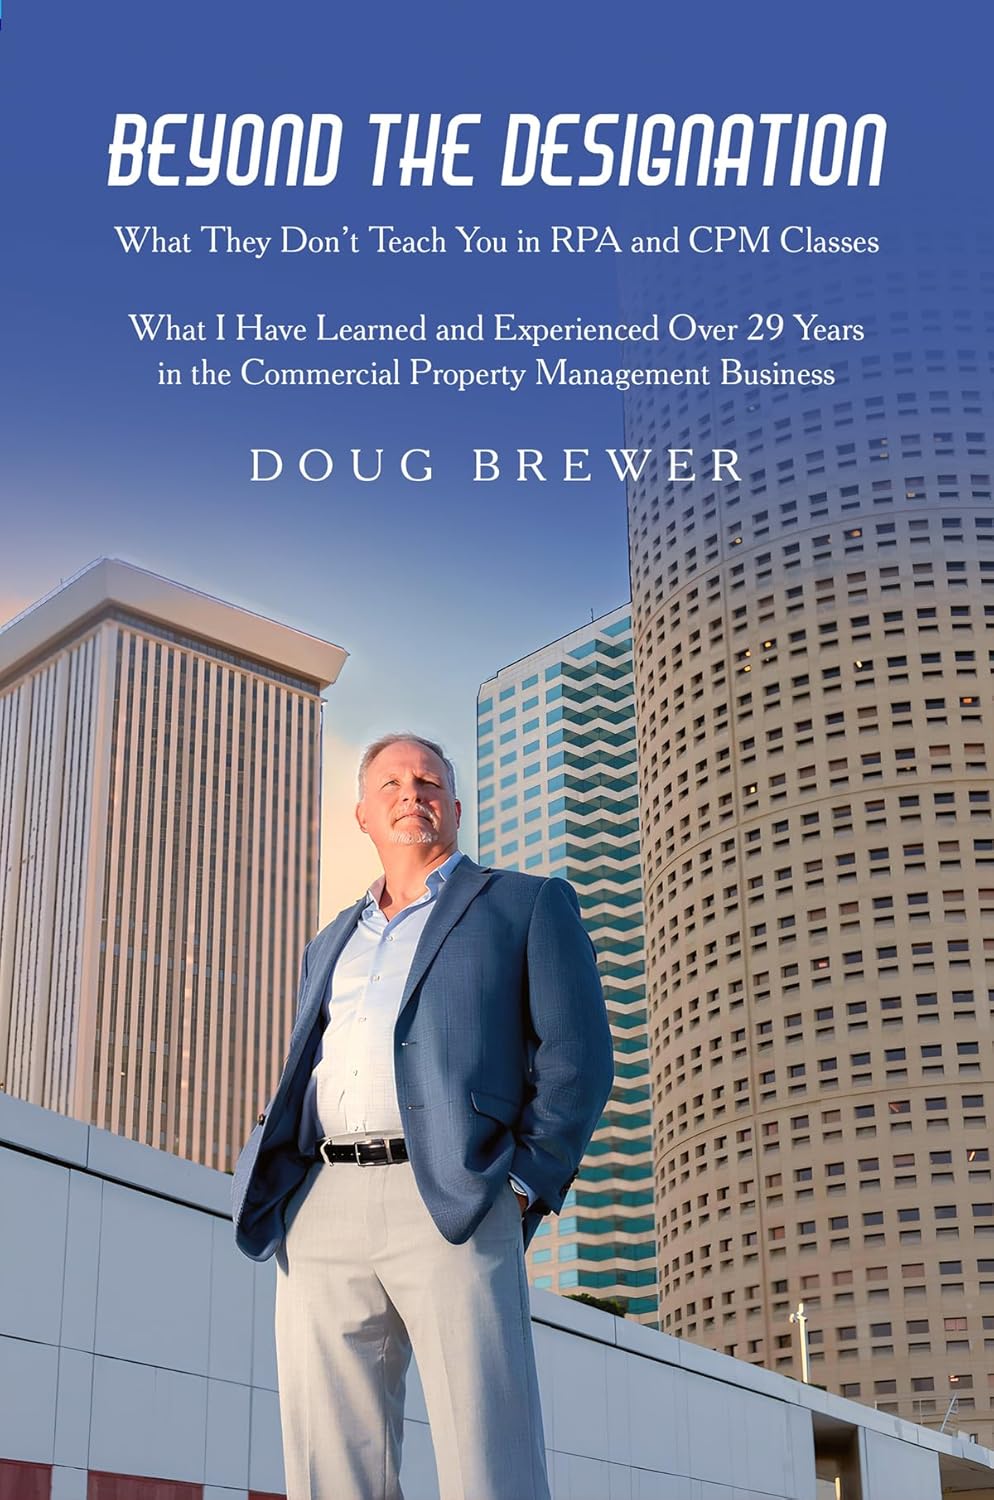 Unlock the Untold Secrets of Property Management with Doug Brewer's New Book: "Beyond the Designation - What They Don’t Teach You in RPA and CPM Classes"